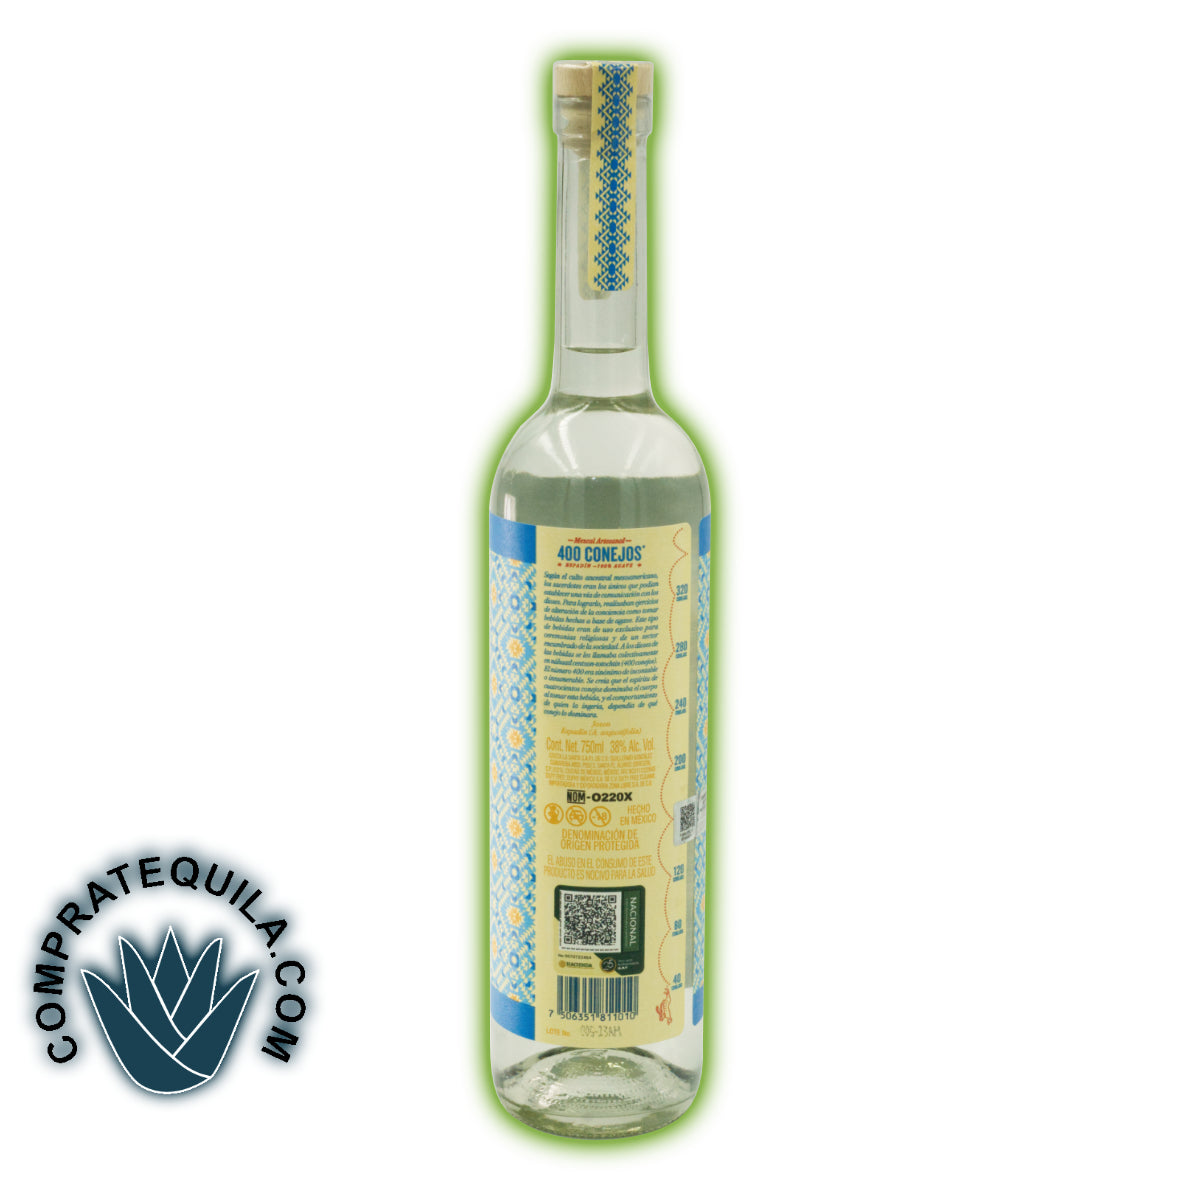 Mezcal 400 Conejos® Espadín: Oaxaca in a Bottle, Your Passage to Tradition